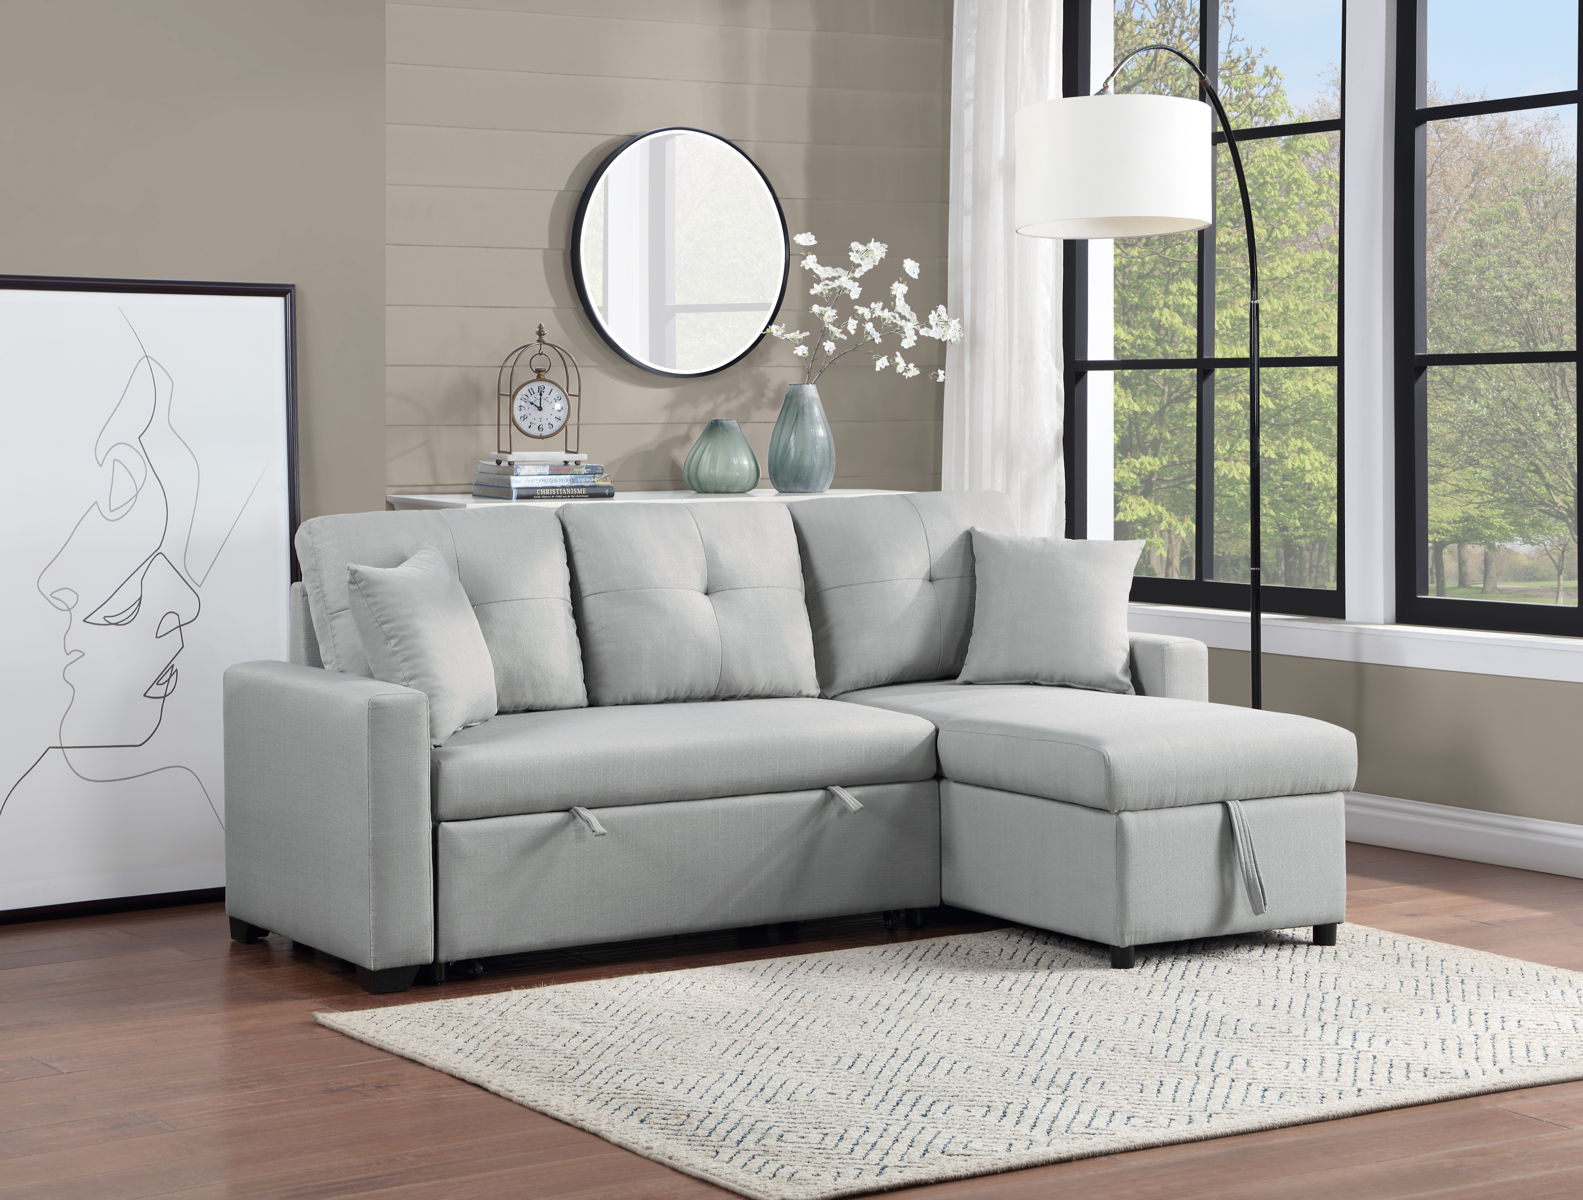 Francine - Linen Reversible Sleeper Sectional Sofa With Storage Chaise